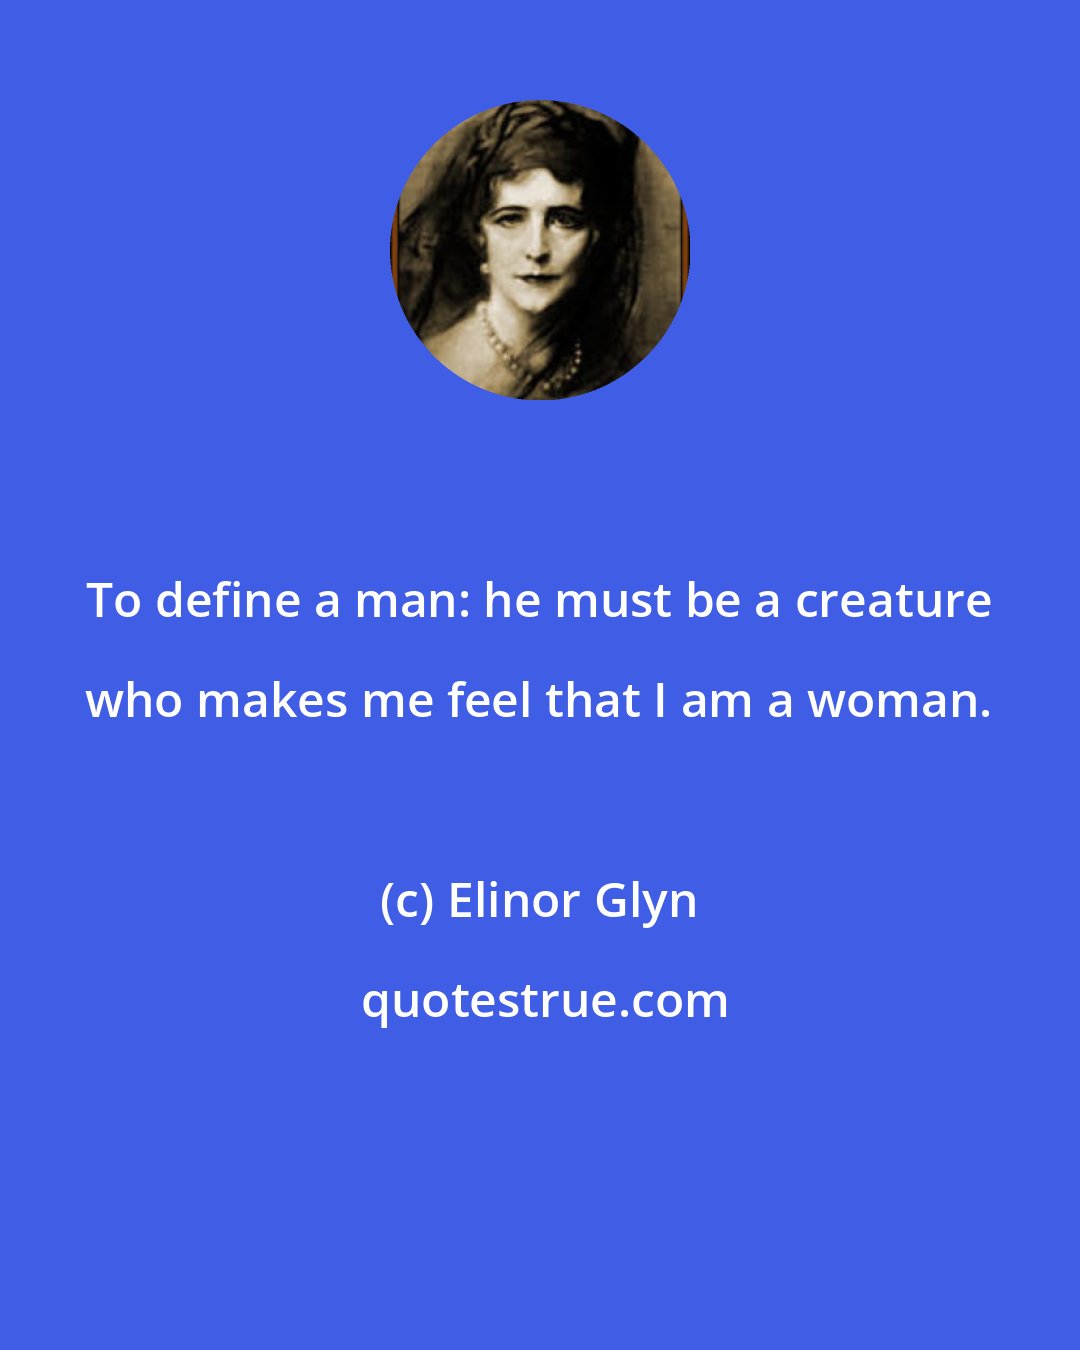 Elinor Glyn: To define a man: he must be a creature who makes me feel that I am a woman.